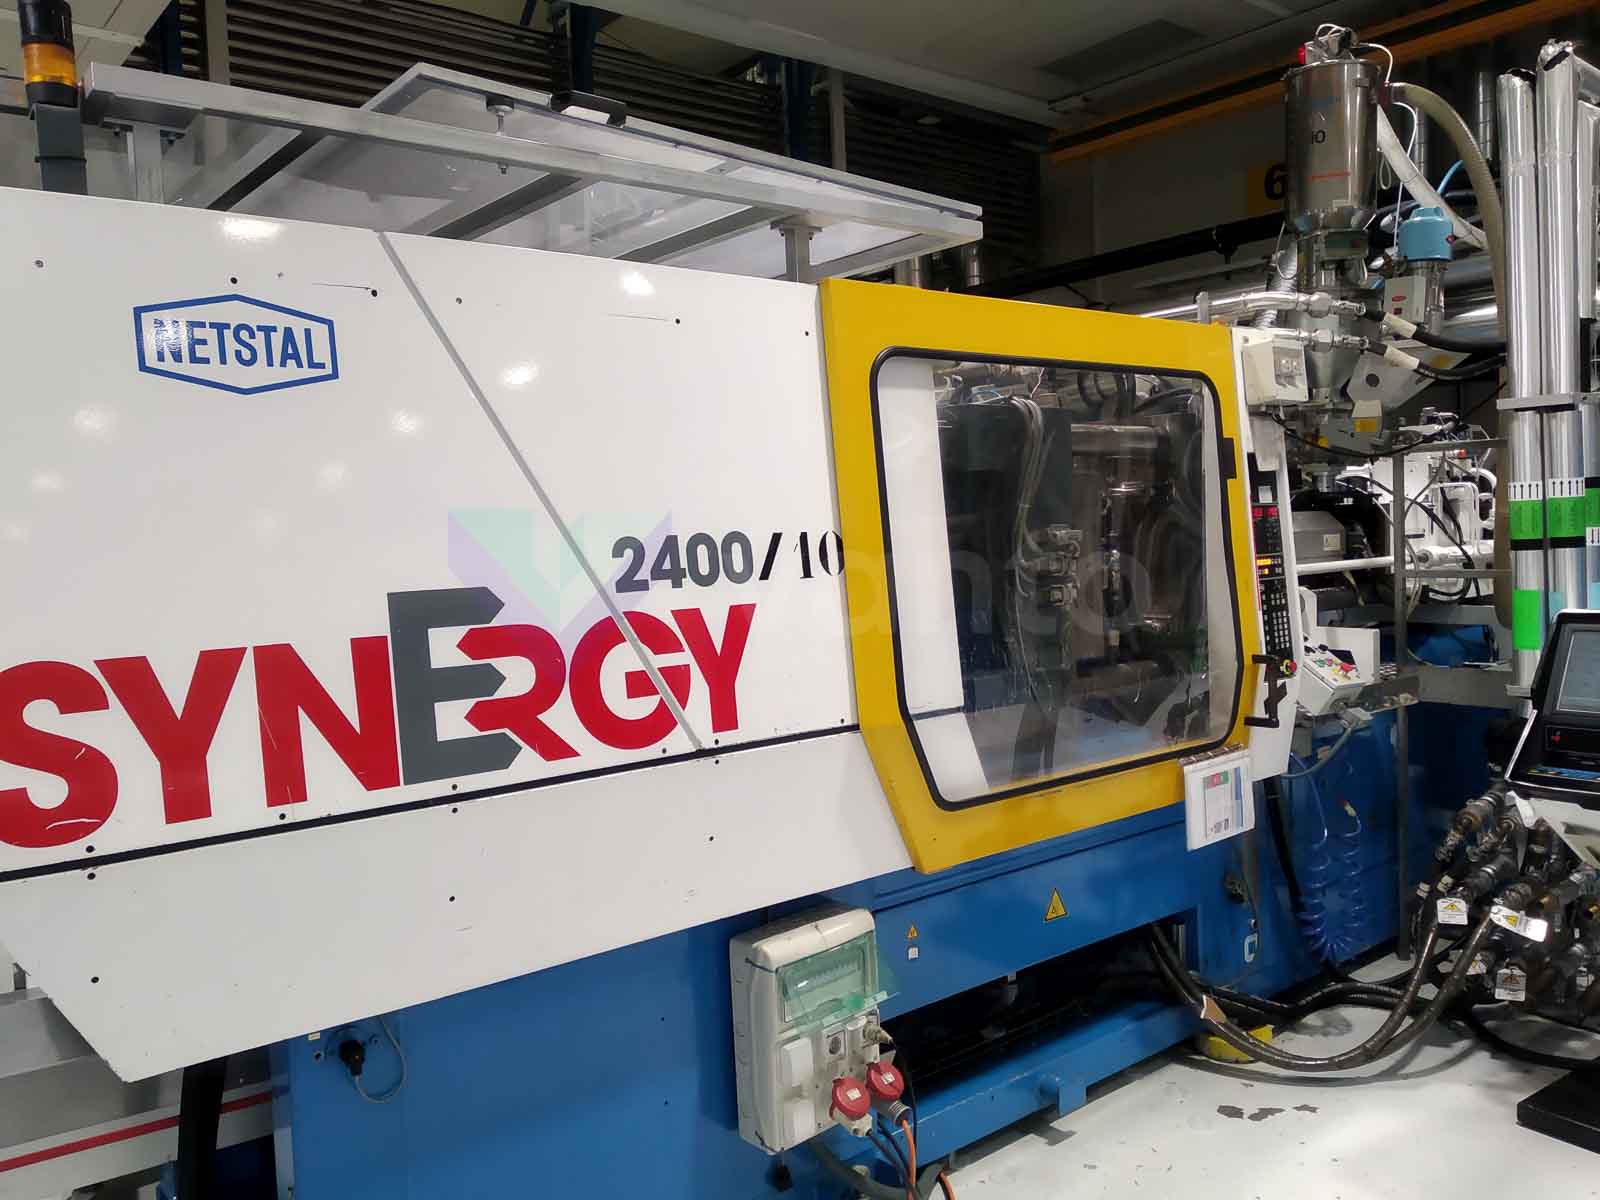 NETSTAL Synergy 2400 DSP2 900SYN 240t injection molding machine (2002) id10620